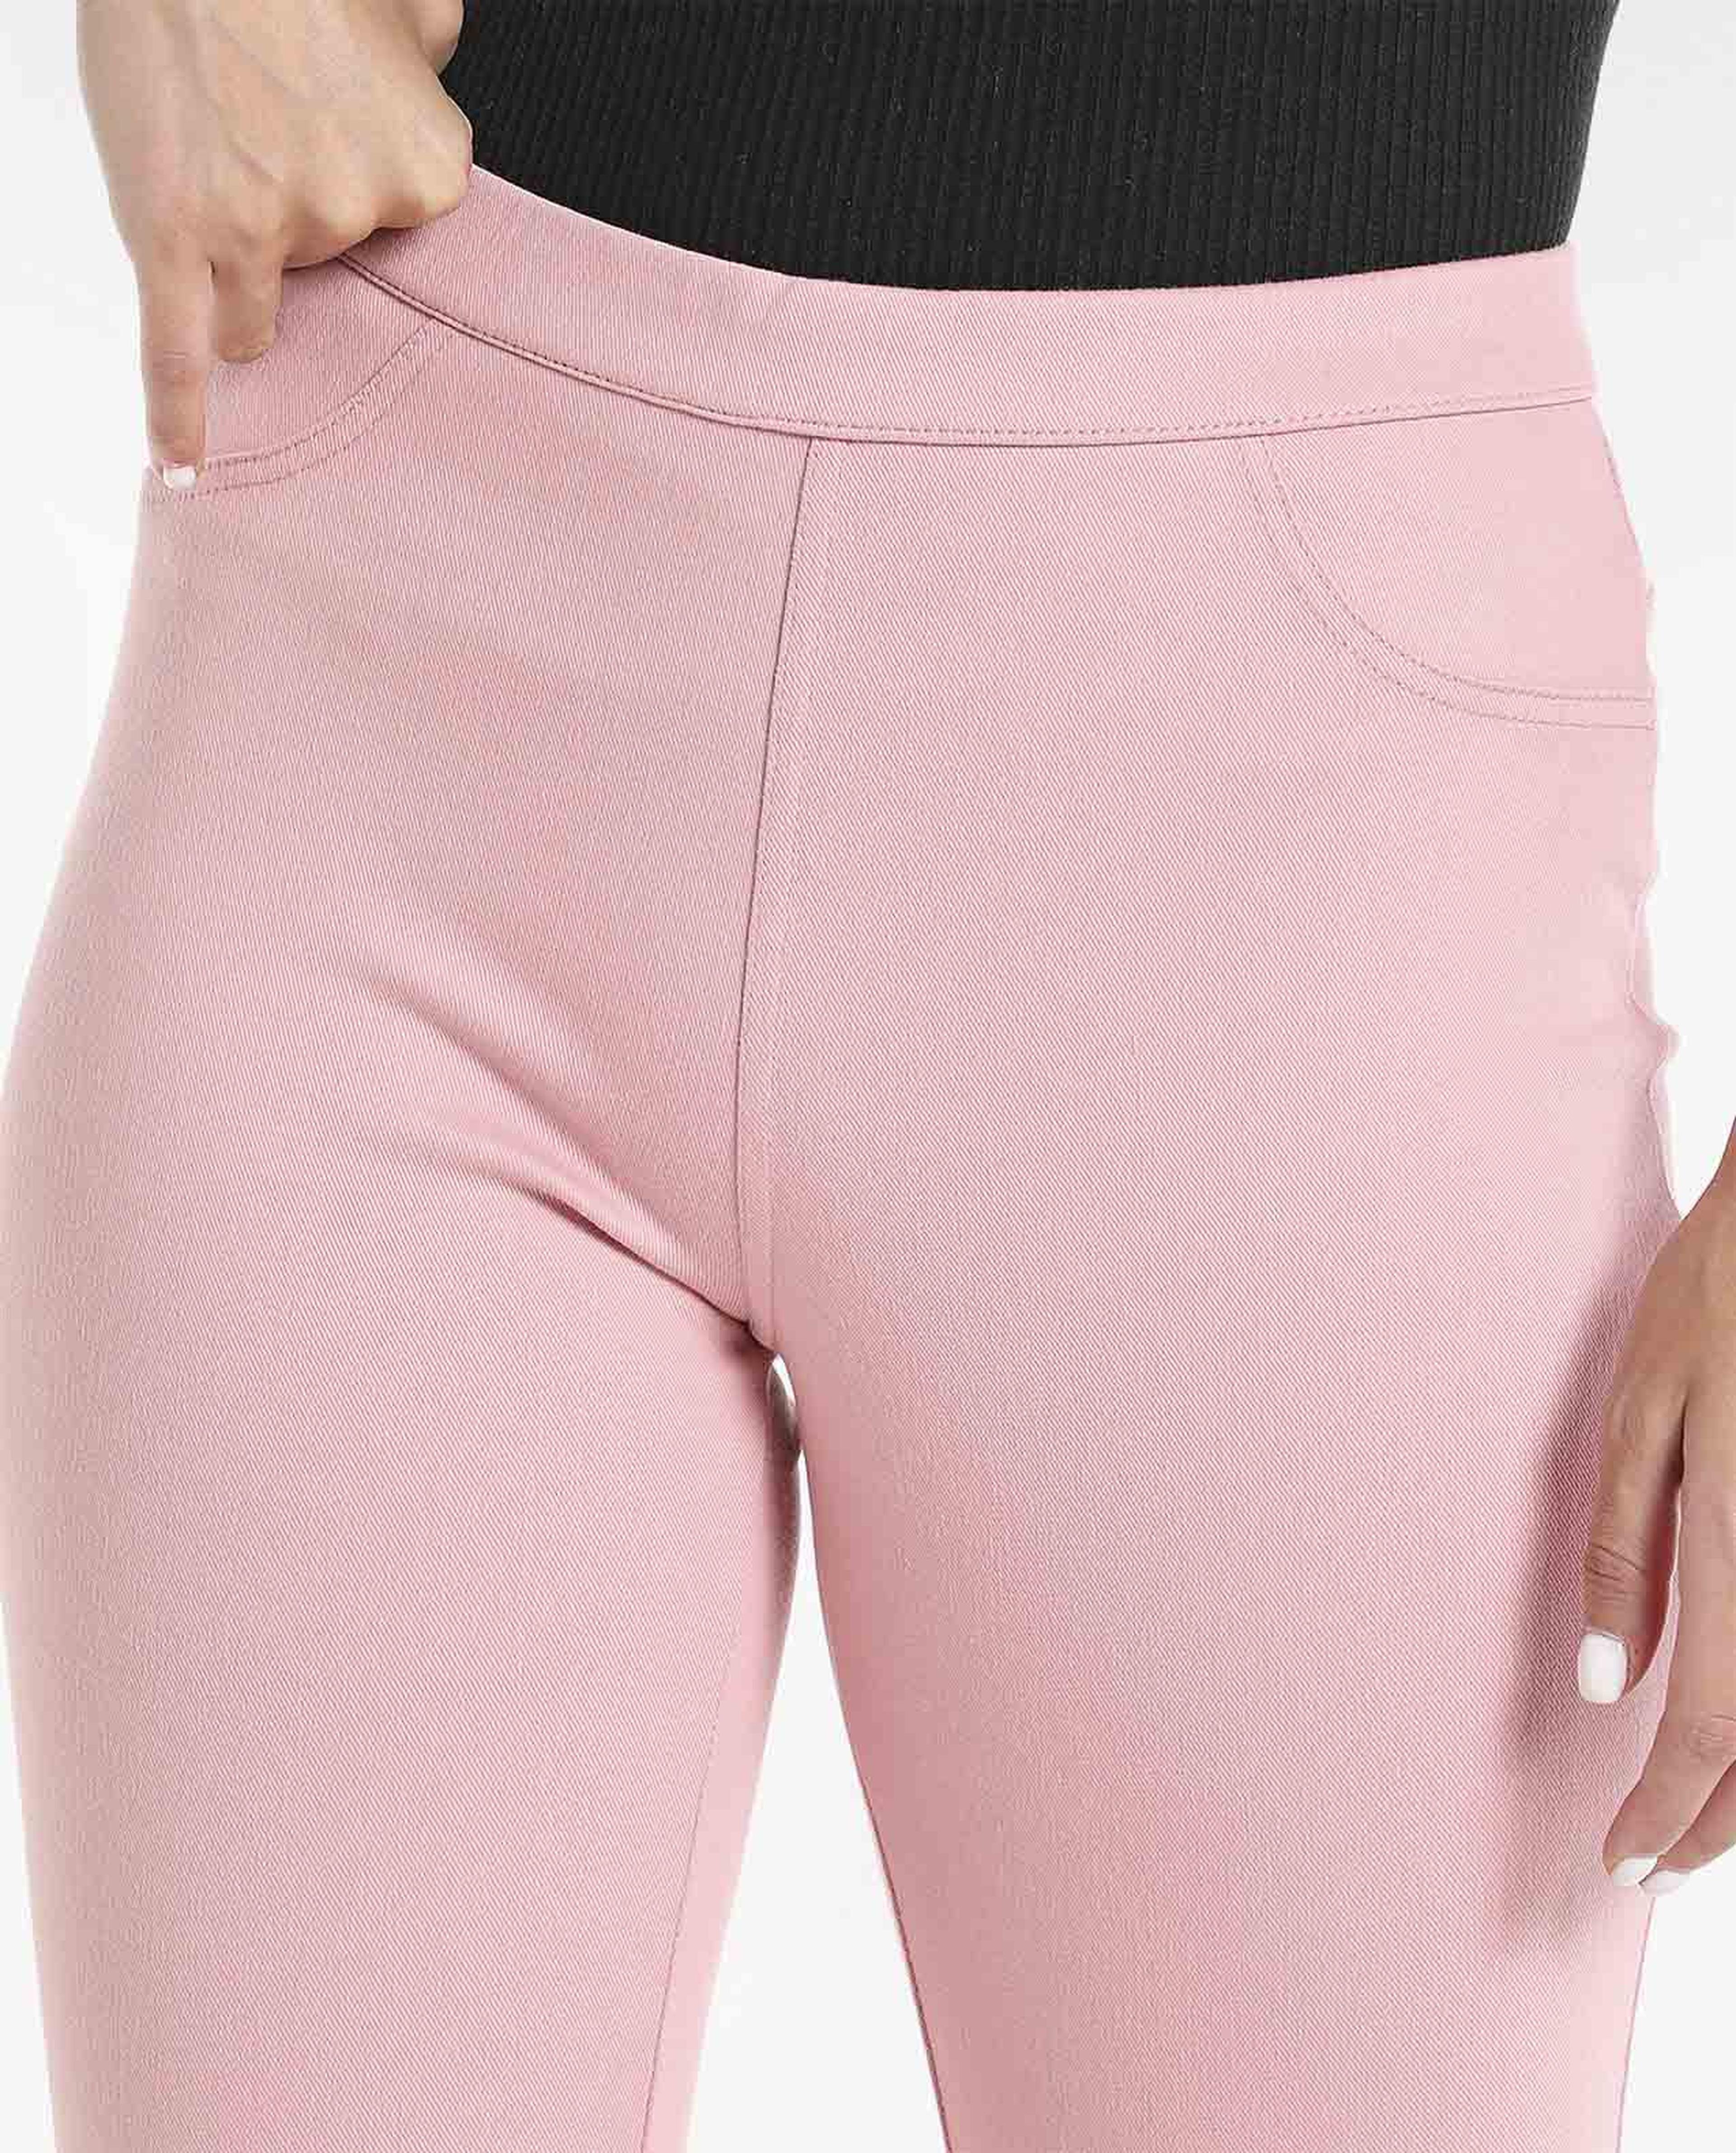 Solid Leggings with Elasticated Waist